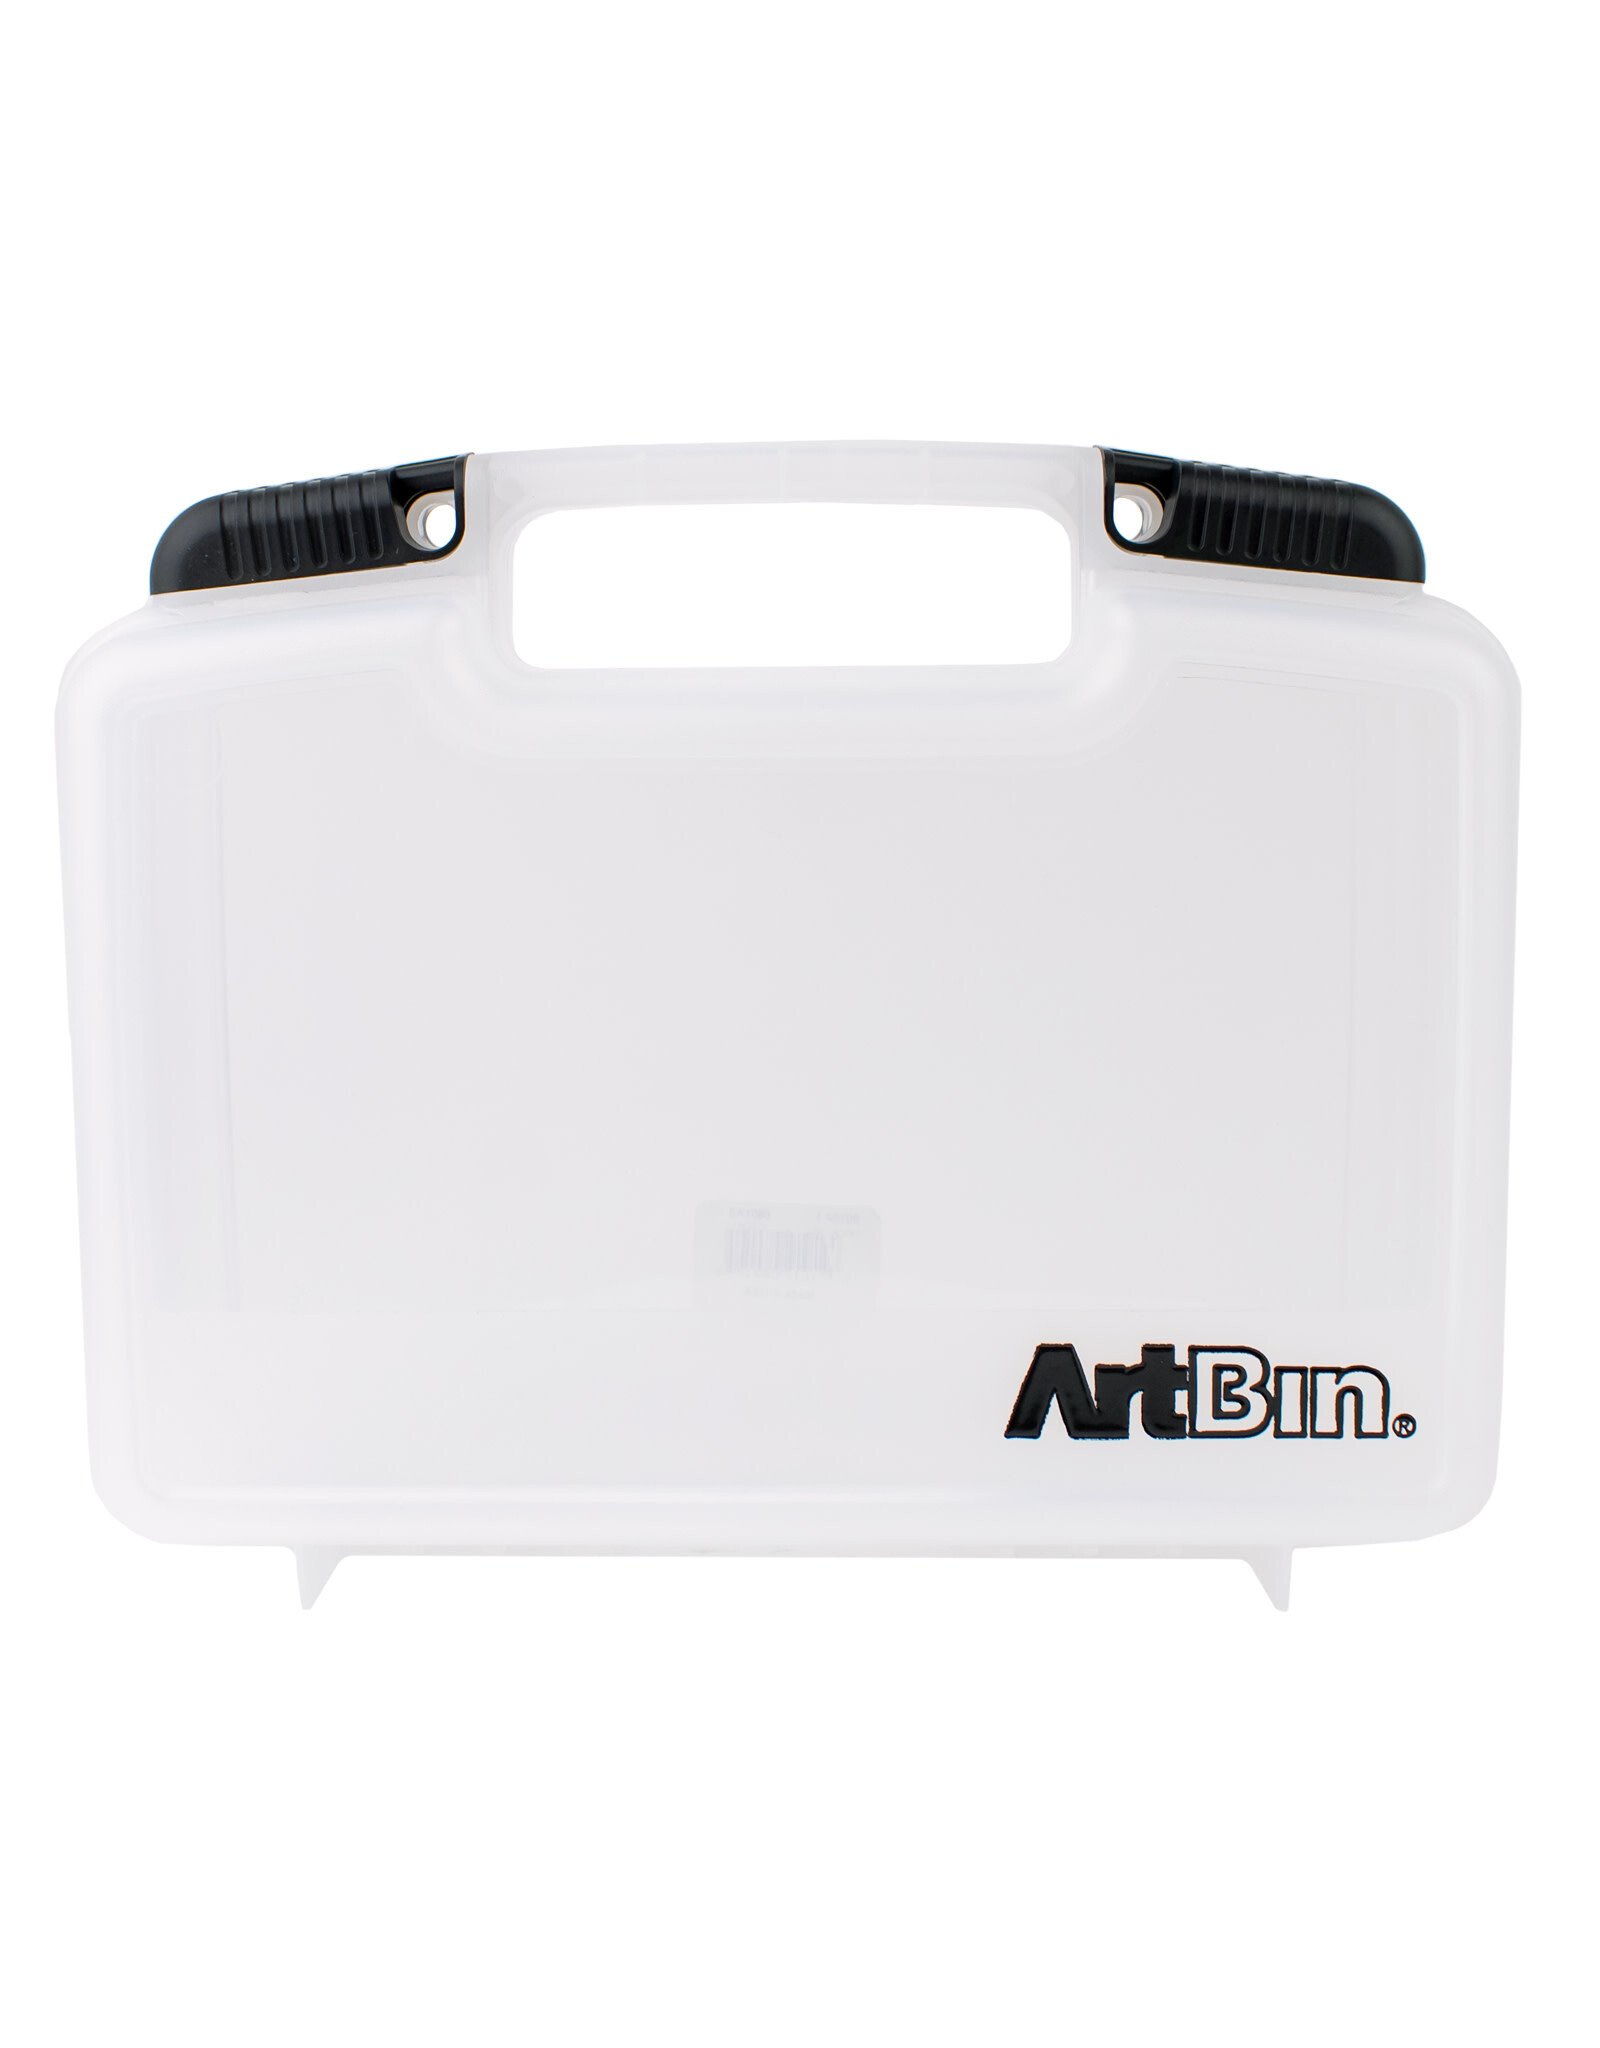 ArtBin Small Quick View Carrying Case Base Clear Trans.